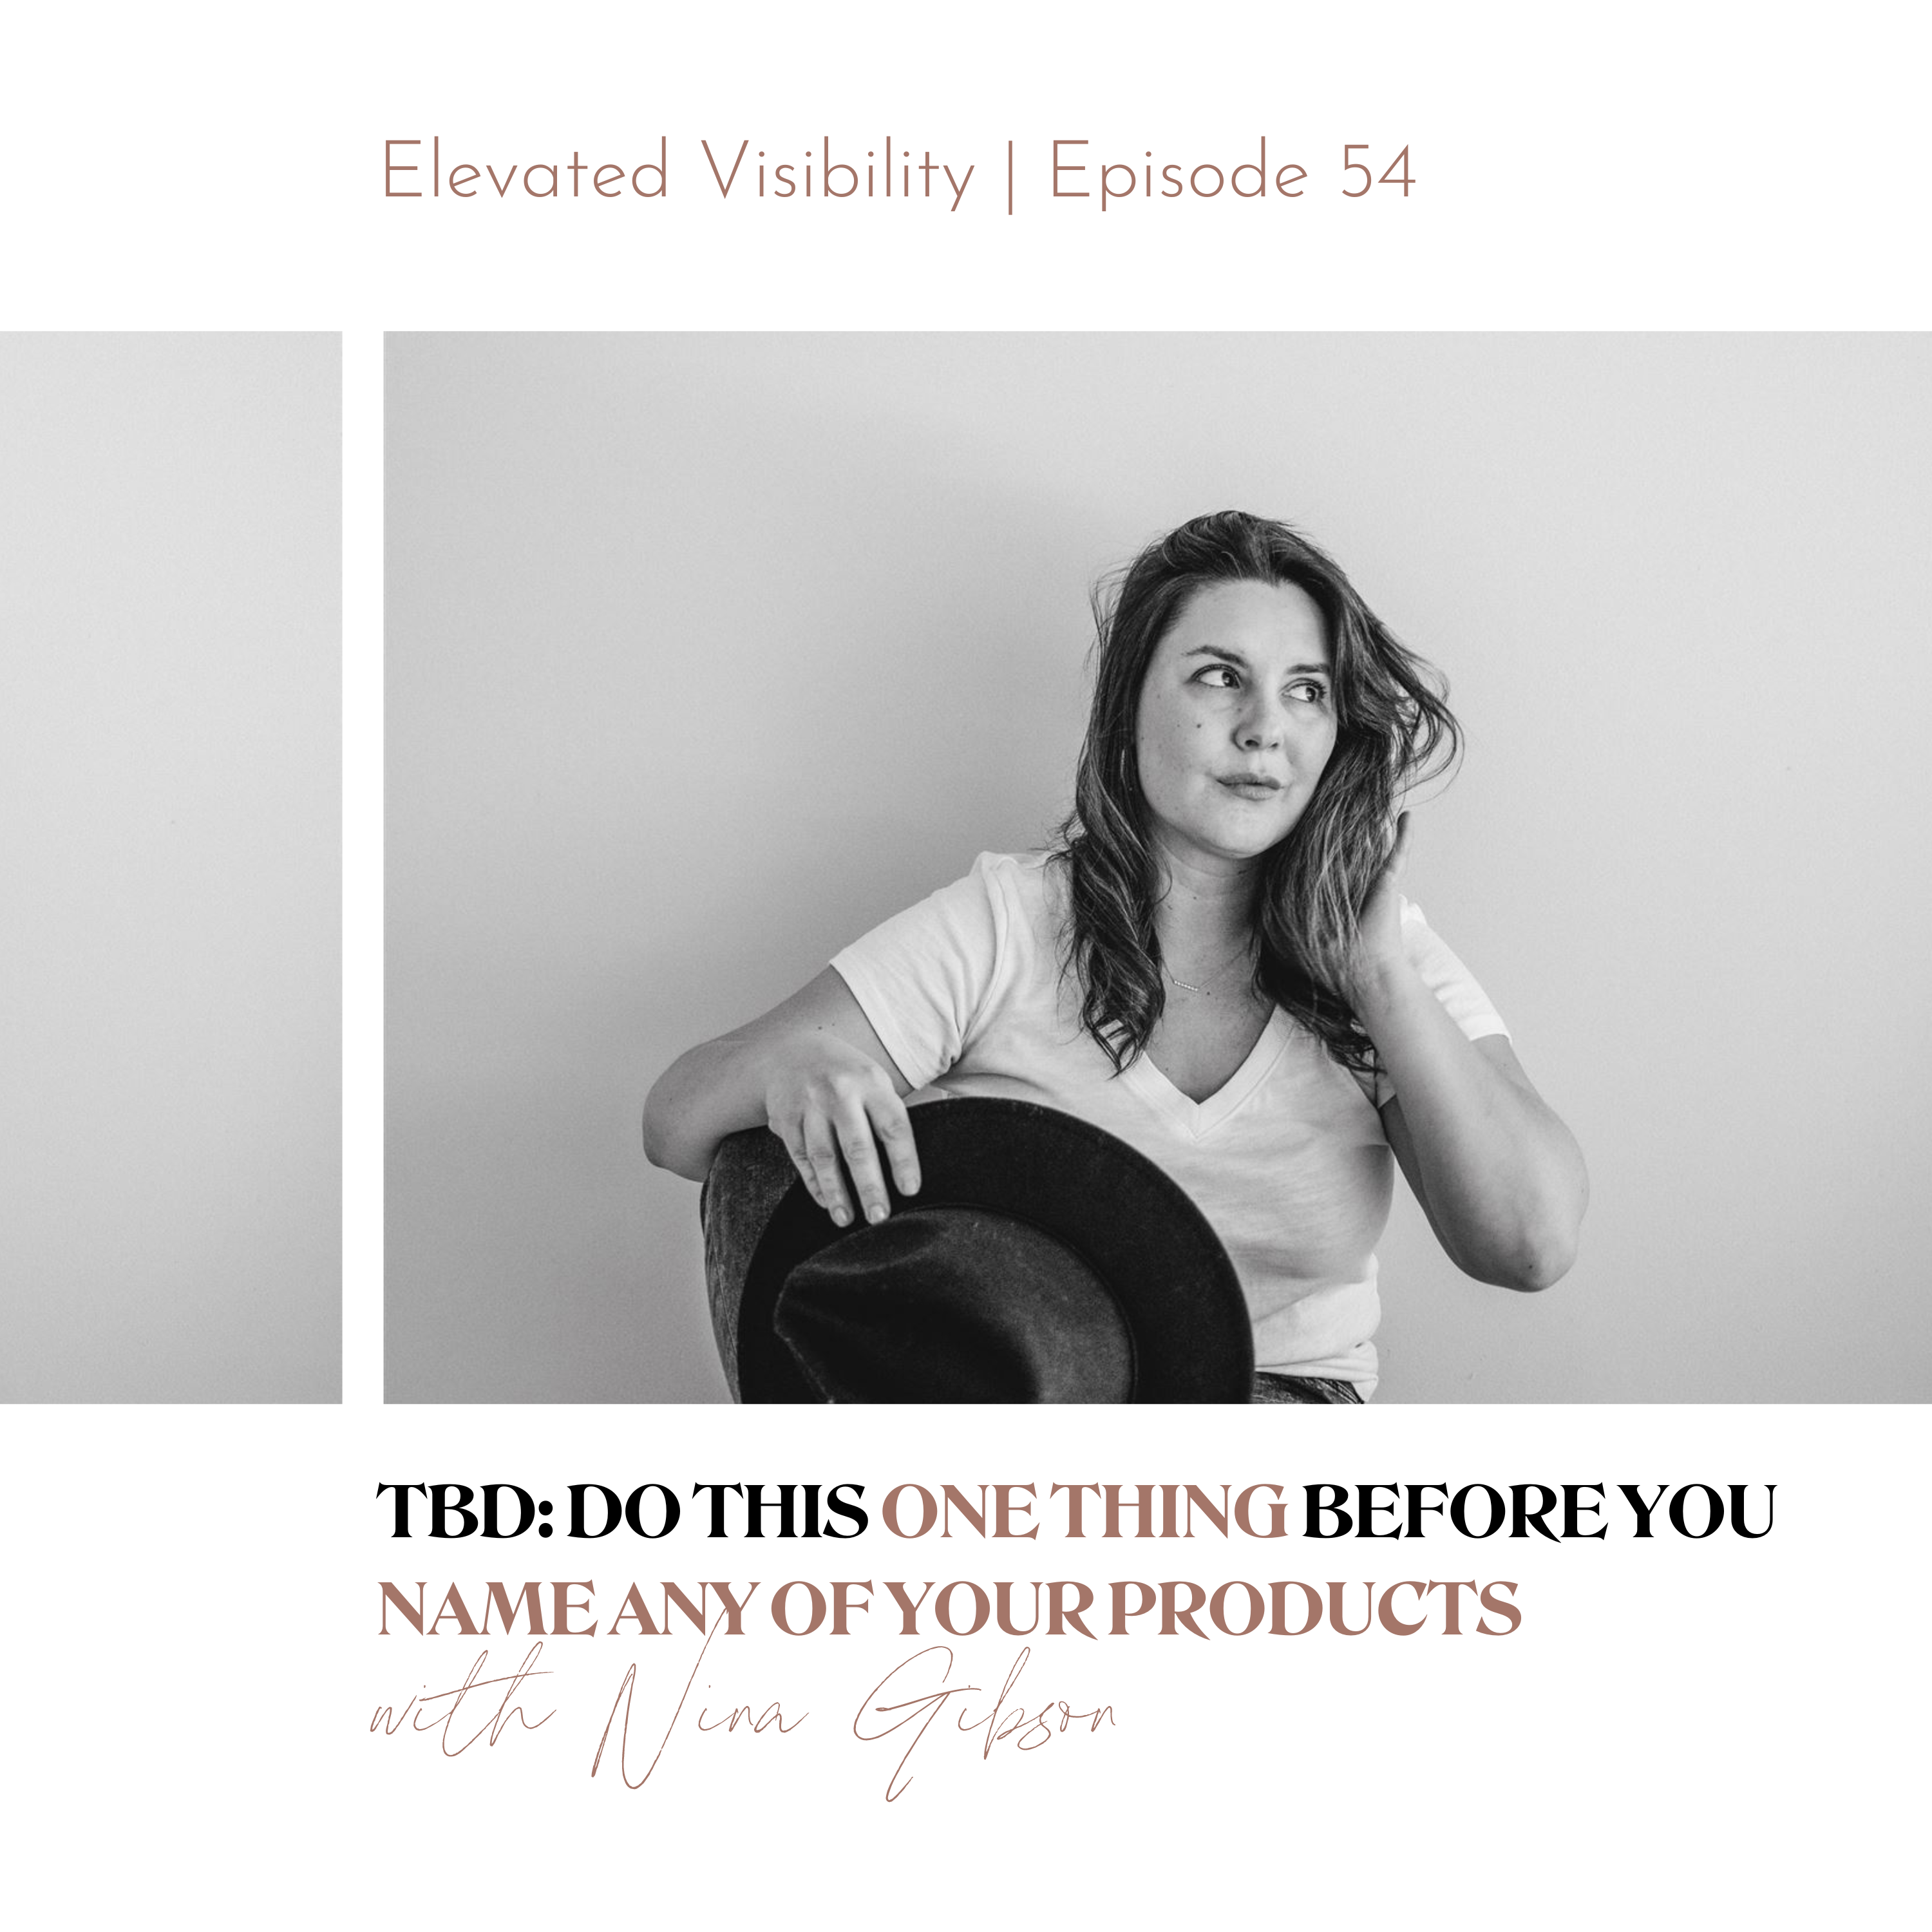 Elevated Visibility episode 54 TBD: Do This One Thing Before You Name Any Of Your Products - featured image